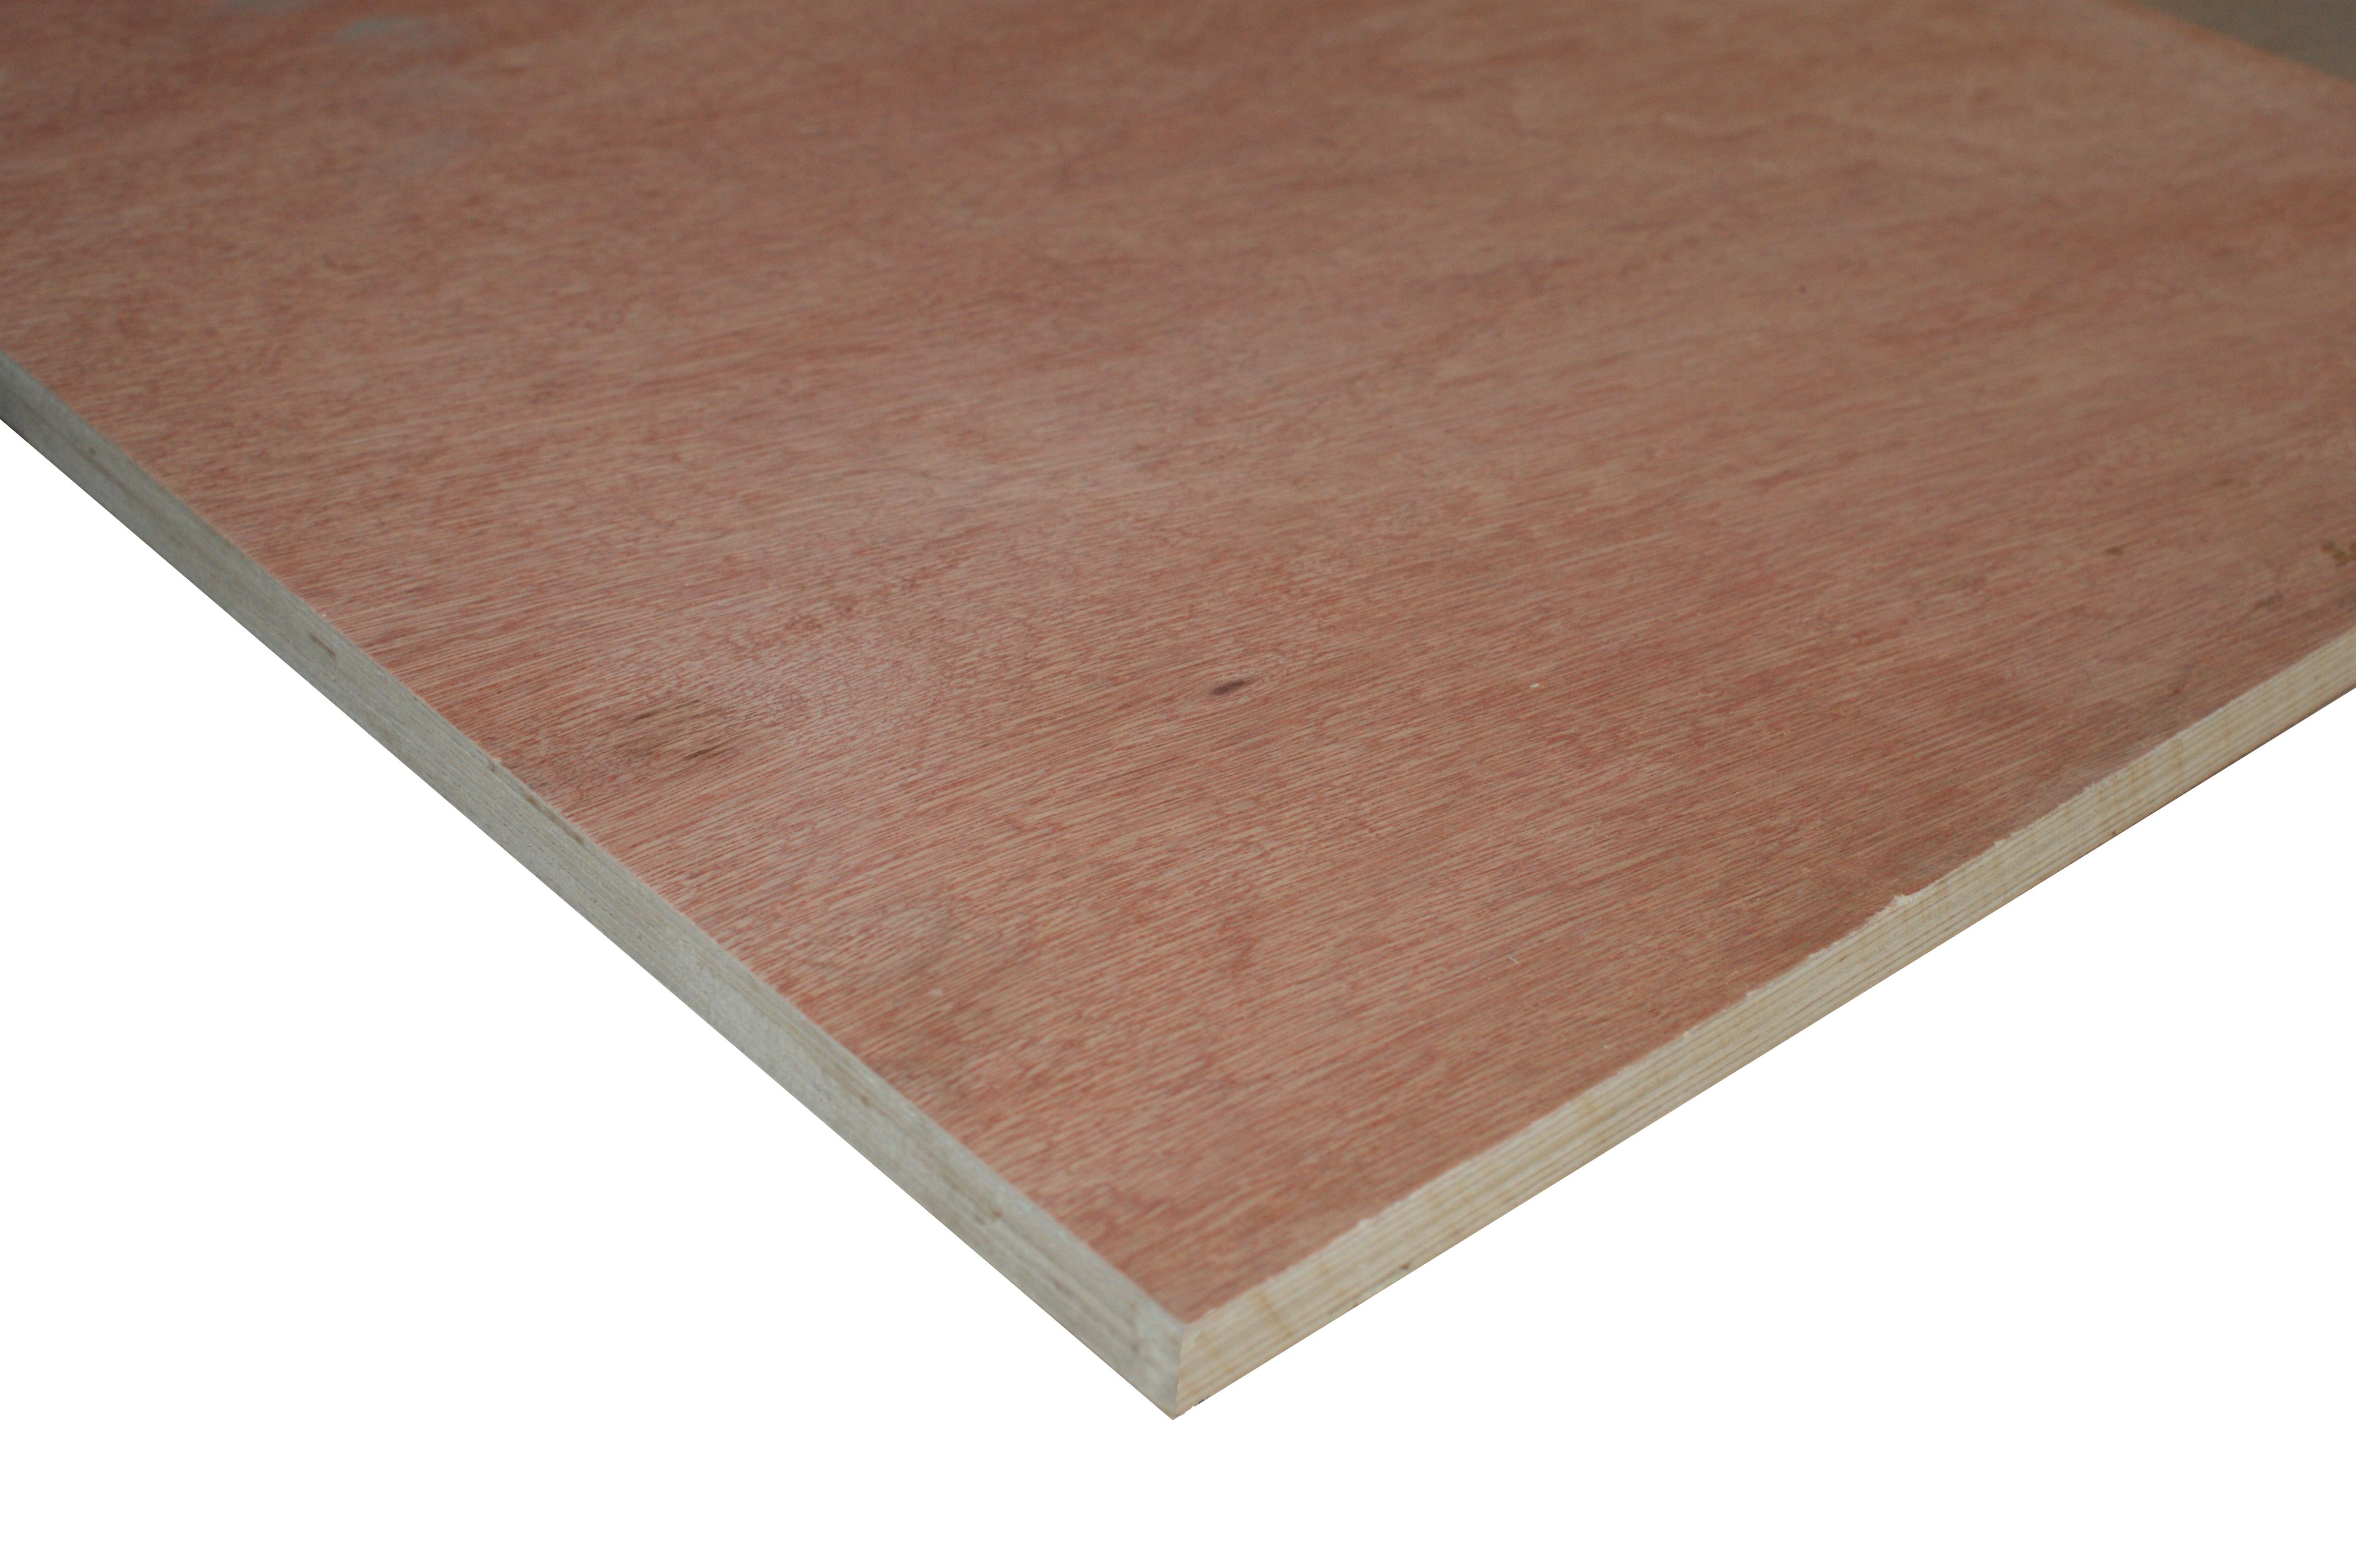 Image of Wickes Non-Structural Hardwood Plywood - 18 x 606 x 1220mm